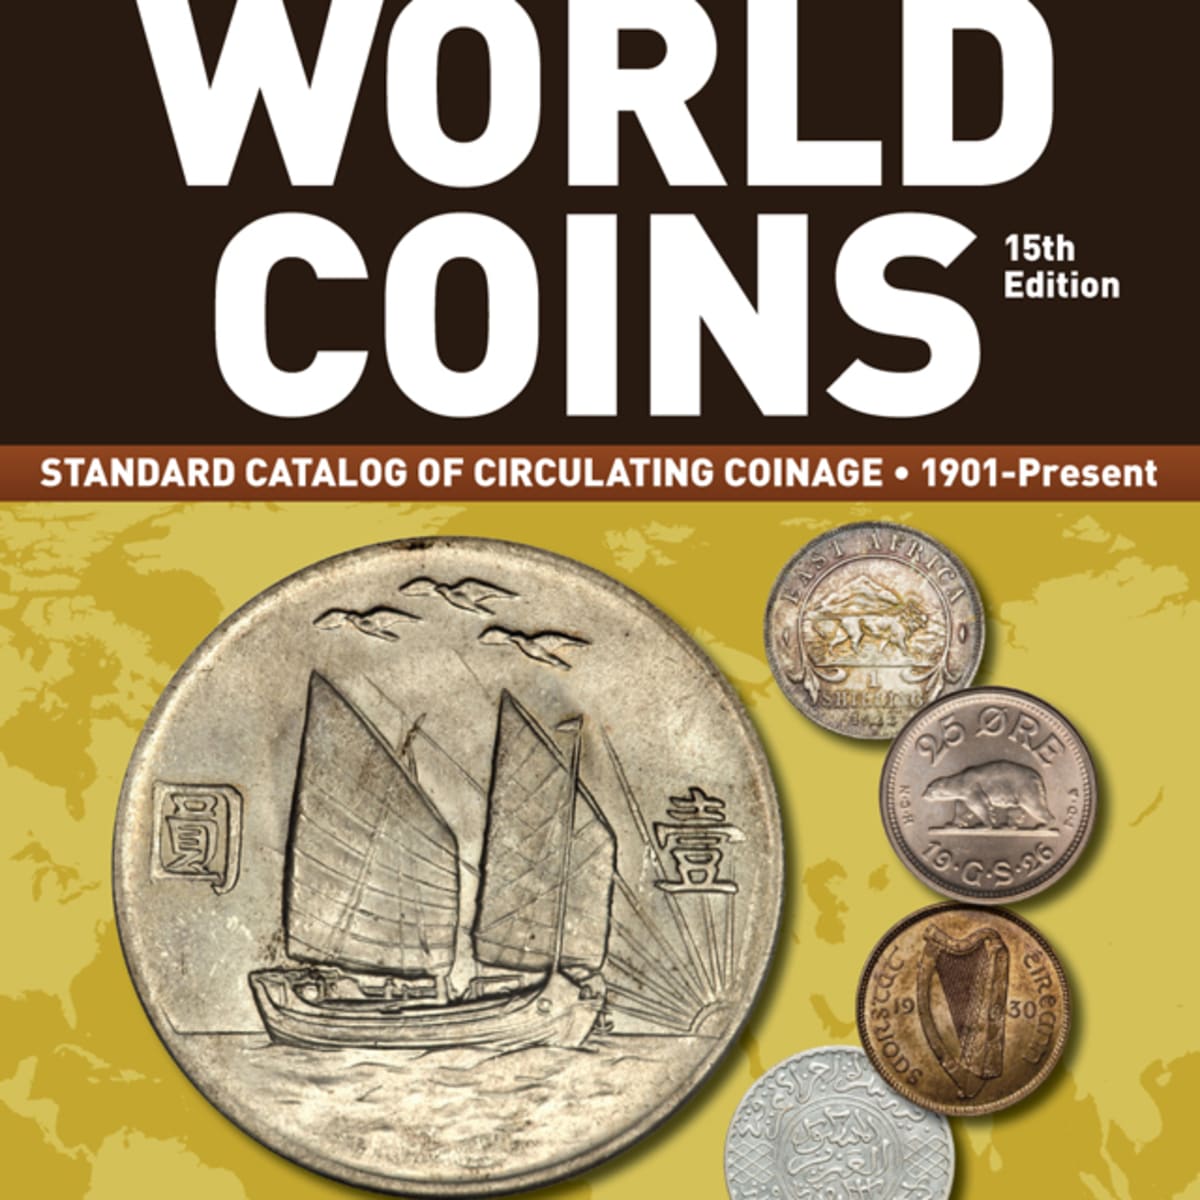 New Collecting World Coins hits market - Numismatic News